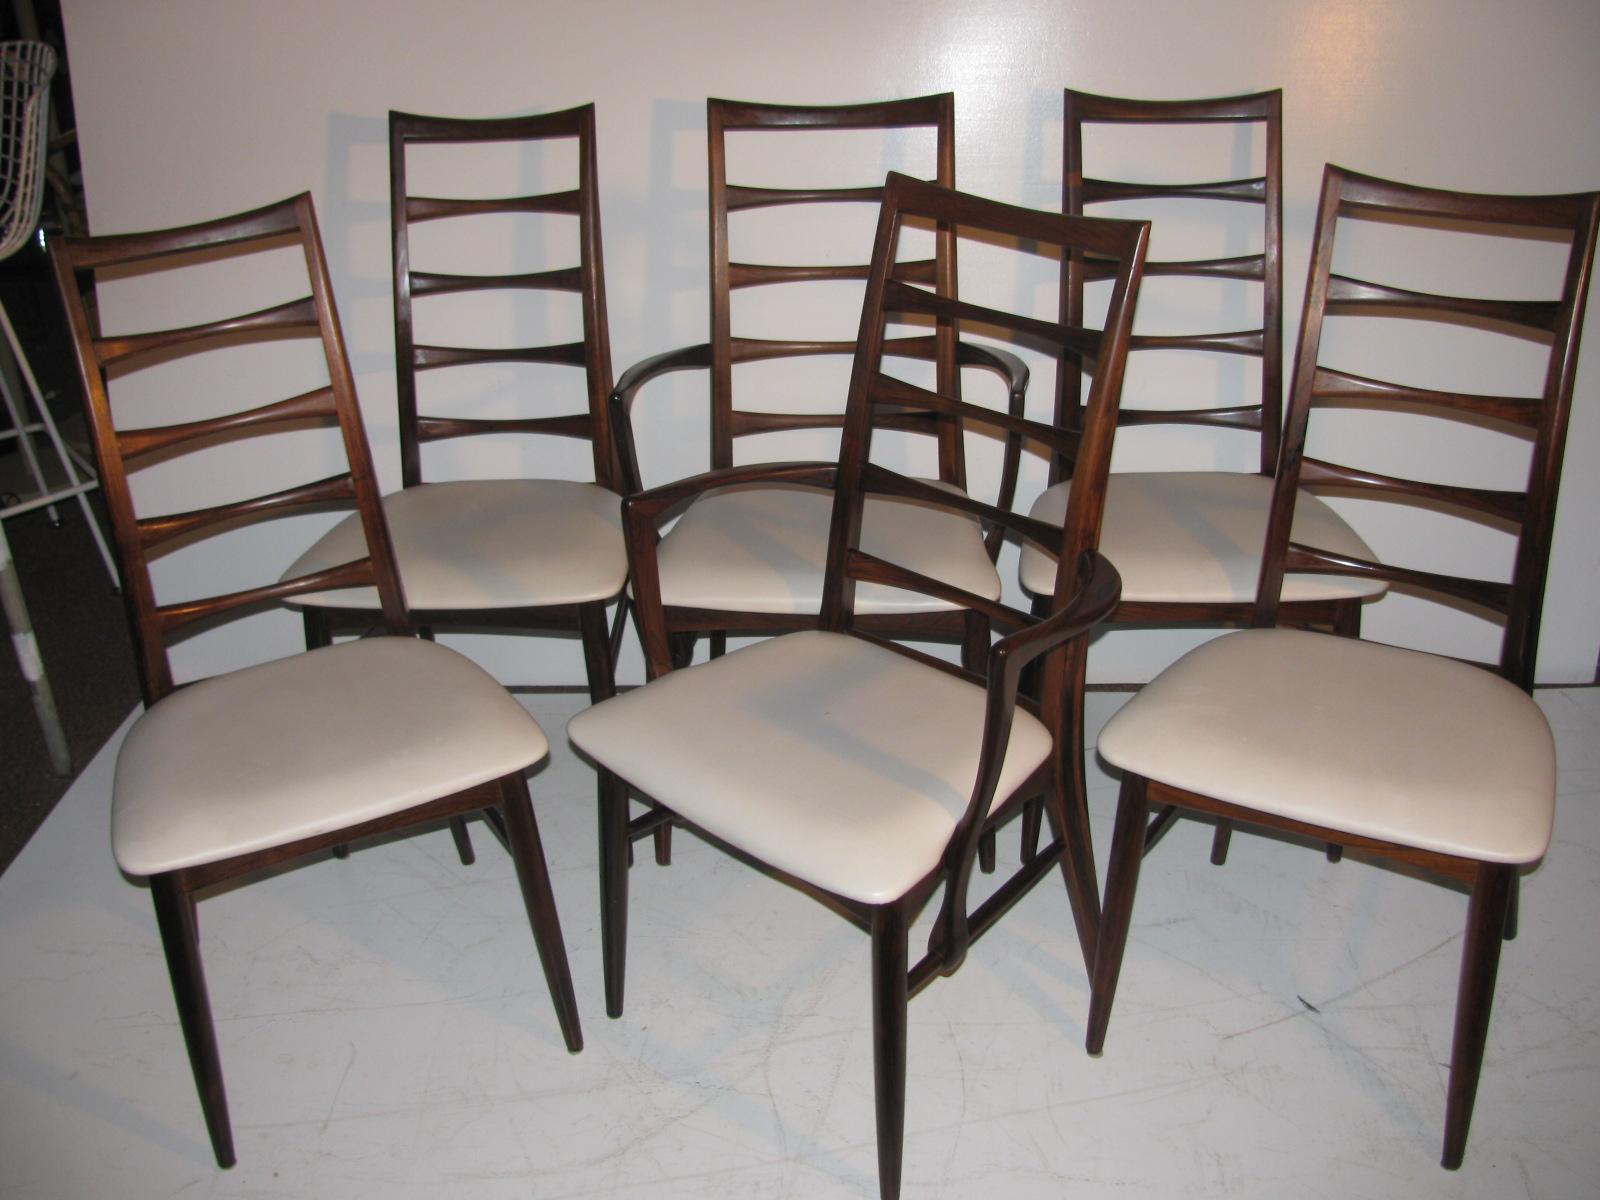 Mid-20th Century Set of Six Midcentury Danish Modern Rosewood Dining Chairs by Niels Koefoed